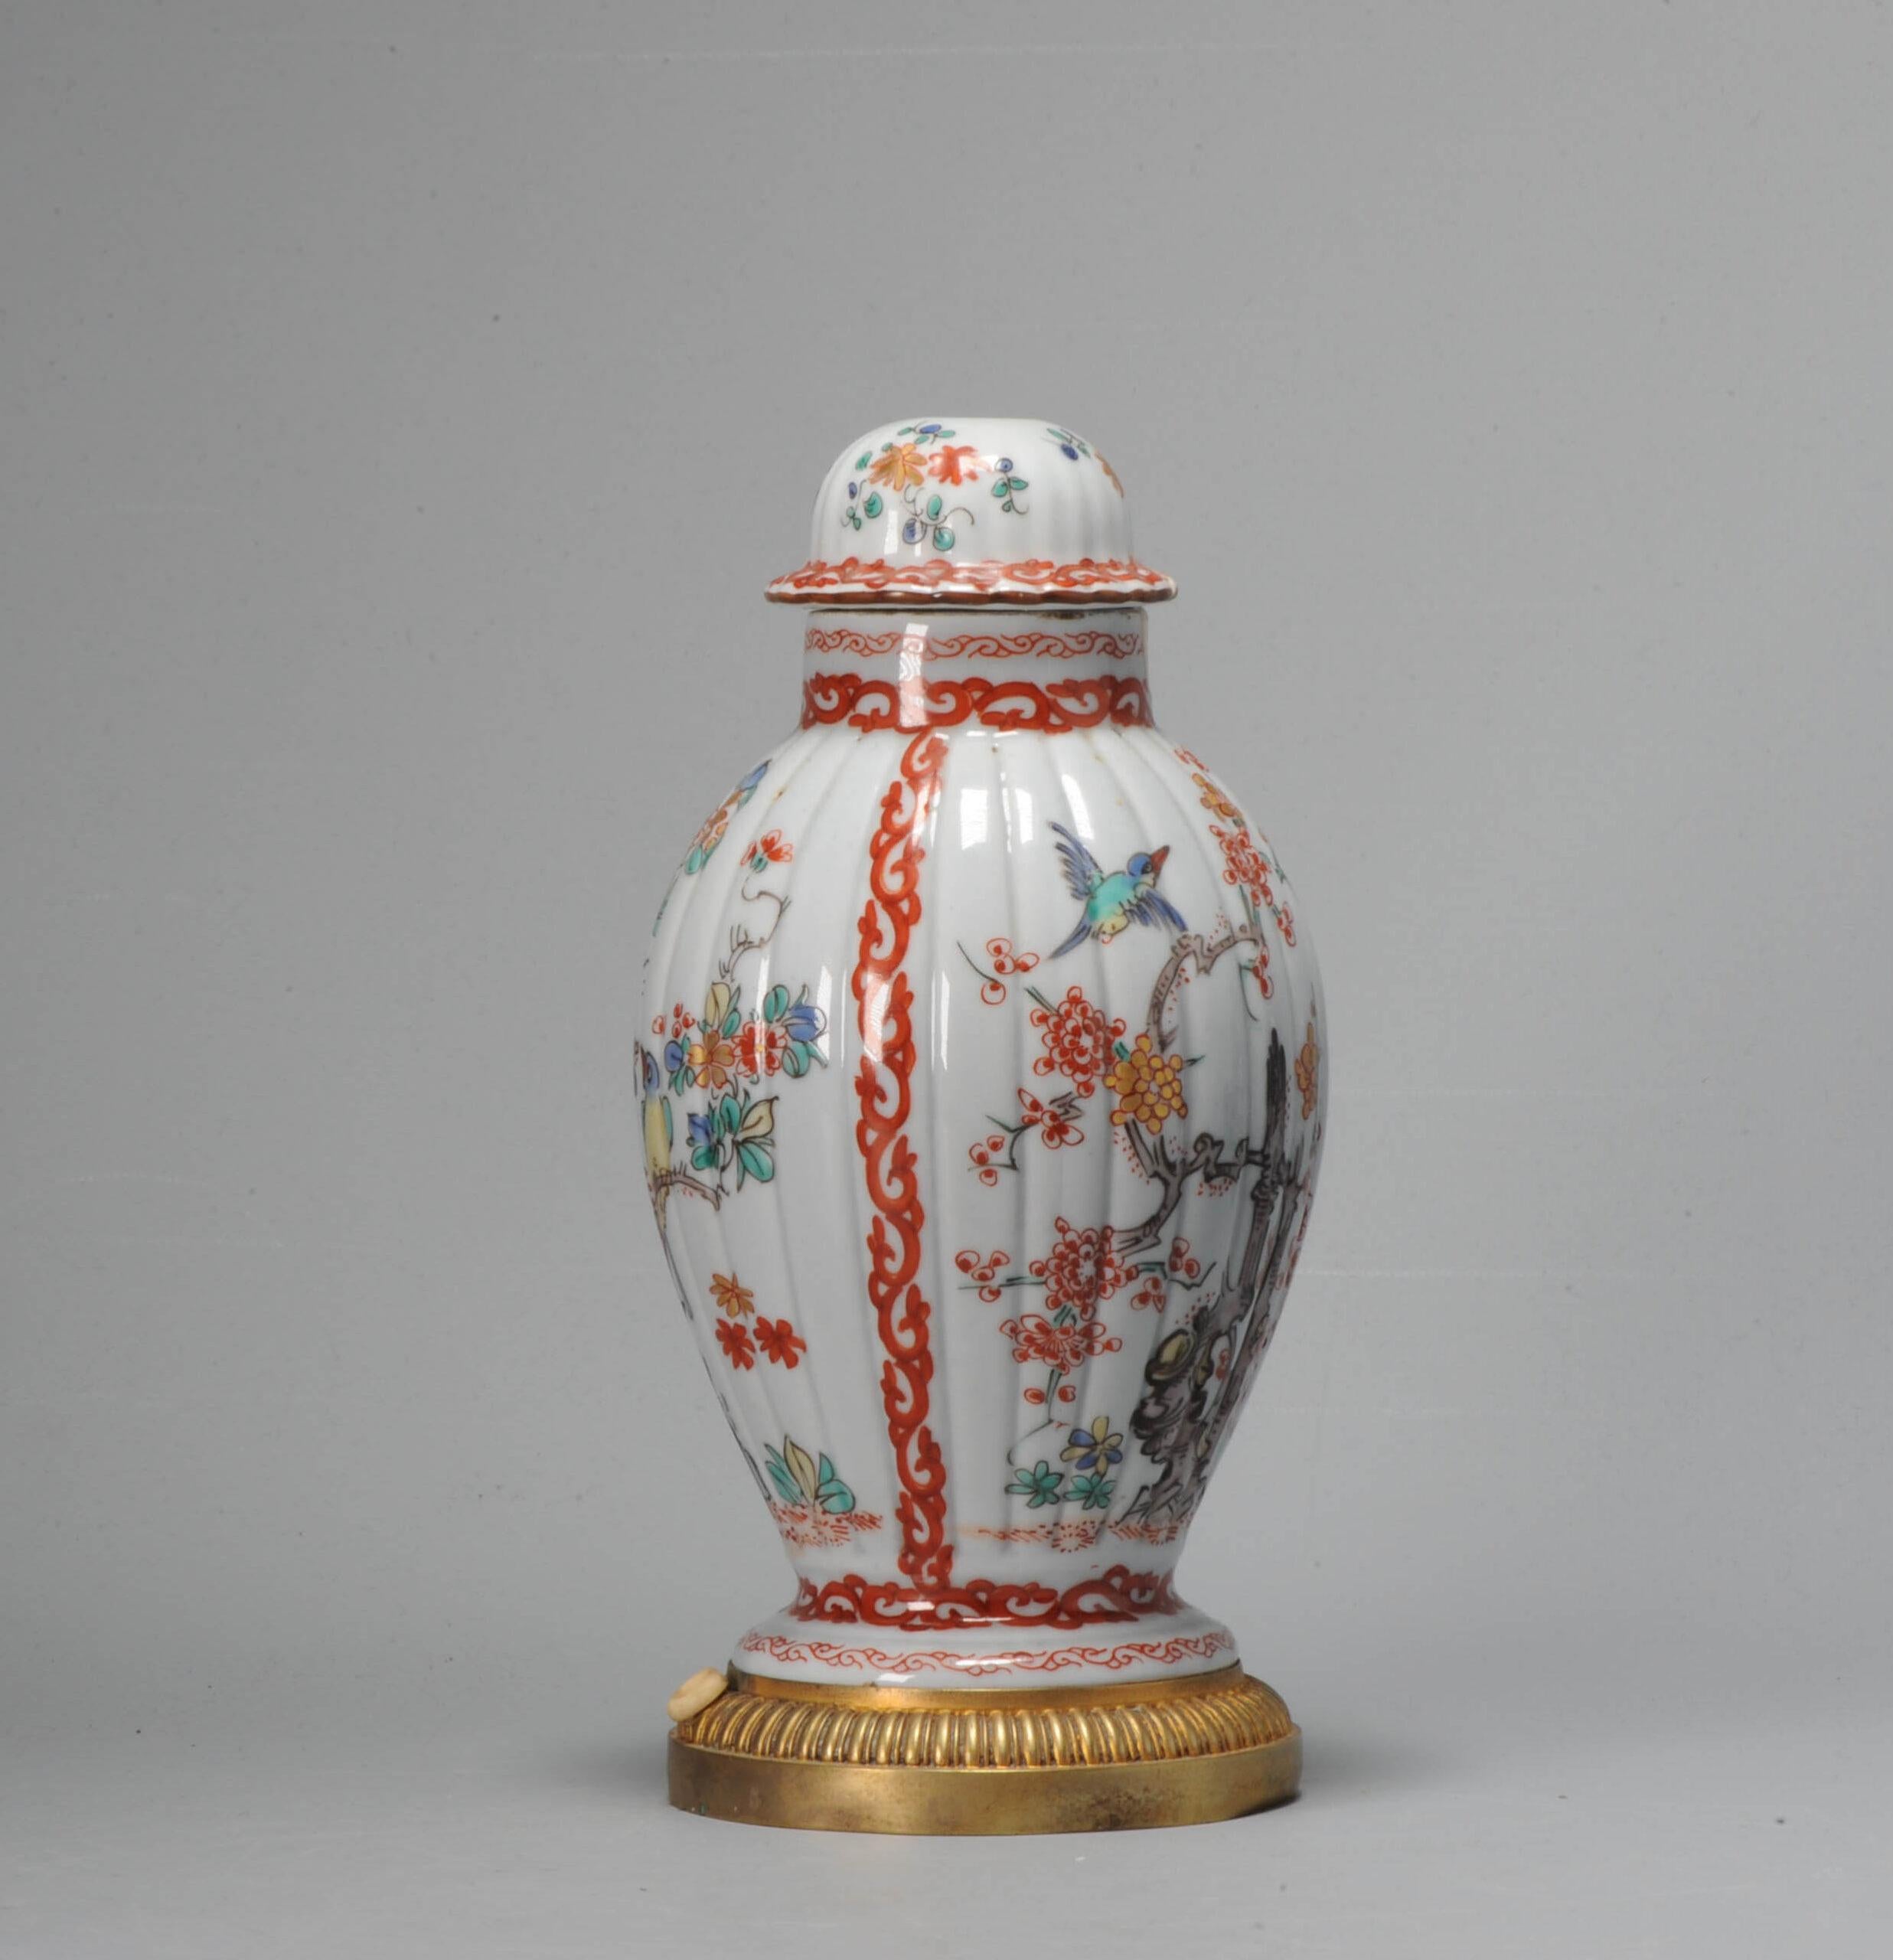 A very nice and unusual 18C French Chantilly vase in Kakiemon style. Different kind of birds in a landscape. After Japanese porcelain example but from France, Chantilly.

With a trumpet mark, which dates to 1725 to 1800. Probably this is a mid